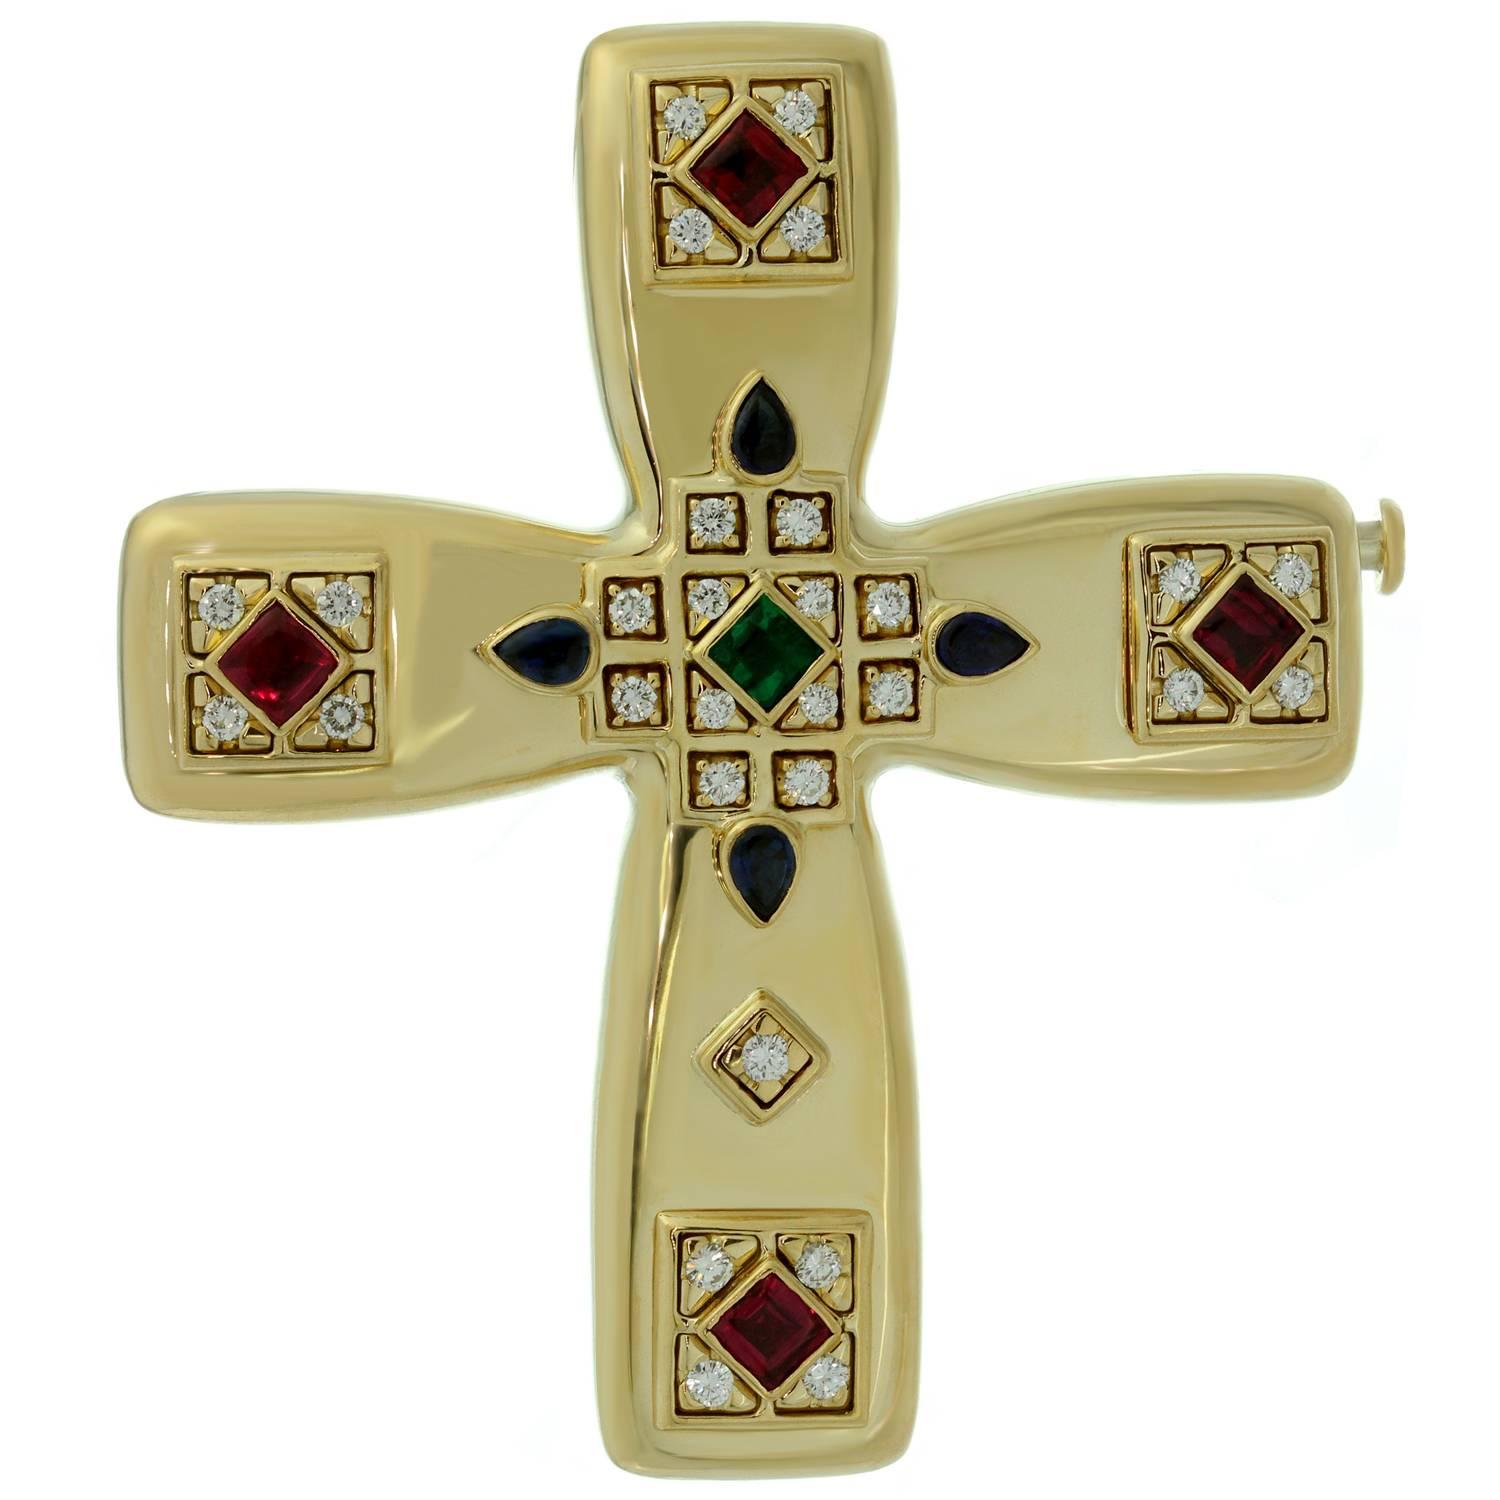 This fabulous Cartier cross is crafter in 18k yellow gold and set with diamonds, rubies, sapphires, and emerald. Can be worn as a pendant or a brooch. The Byzantine motif was designed by Louis Cartier during his trip to Russia in the early part of